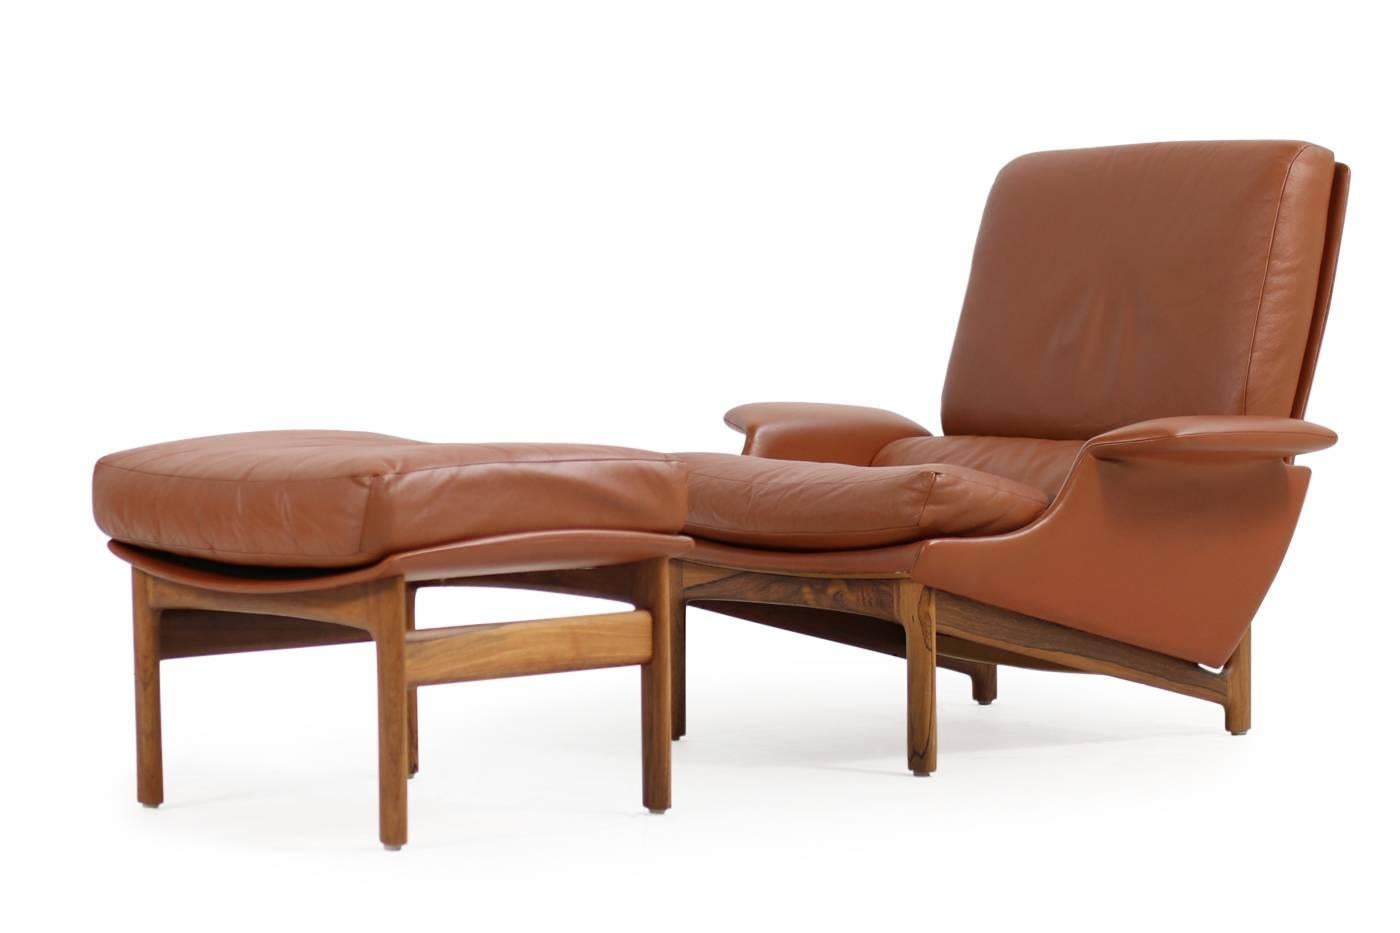 Beautiful and very rare 1960s lounge chair and ottoman by Ib Kofod Larsen, Mod. Adam for Mogens Kold Denmark, amazing condition, cognac leather and rosewood base.
Lounge chair ca. W x D x H, 93 x 79 x 81cm seat height 40cm
Ottoman ca. W x D x H,